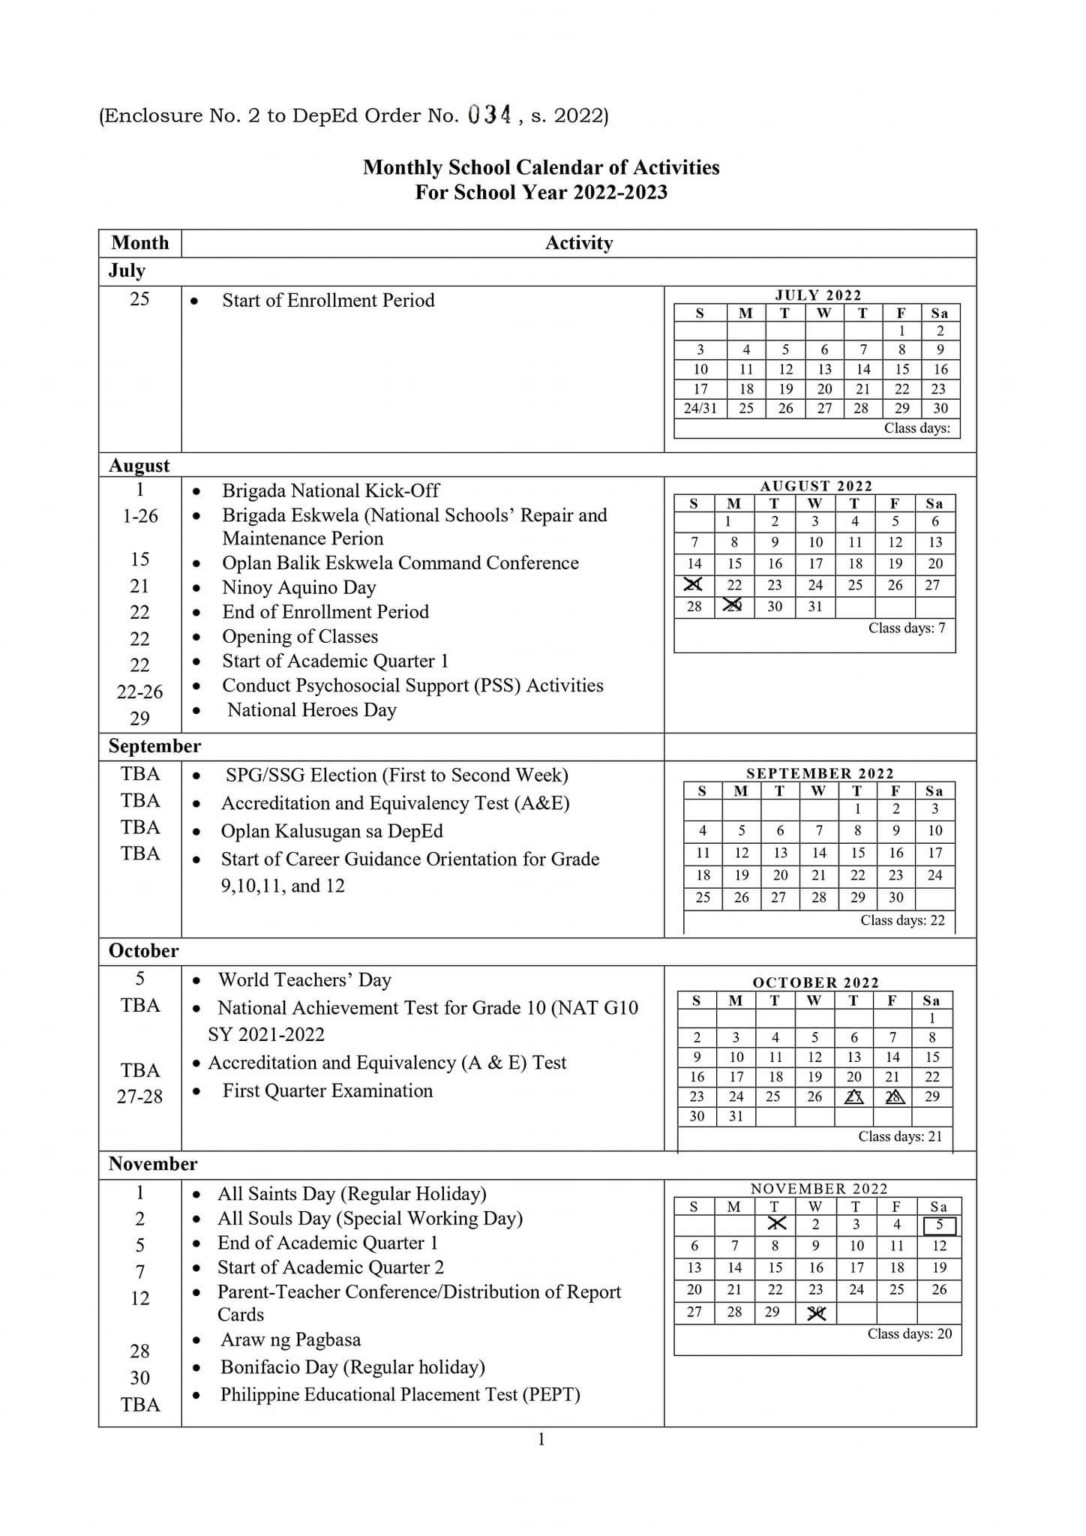 DepEd releases calendar for SY 2022-2023